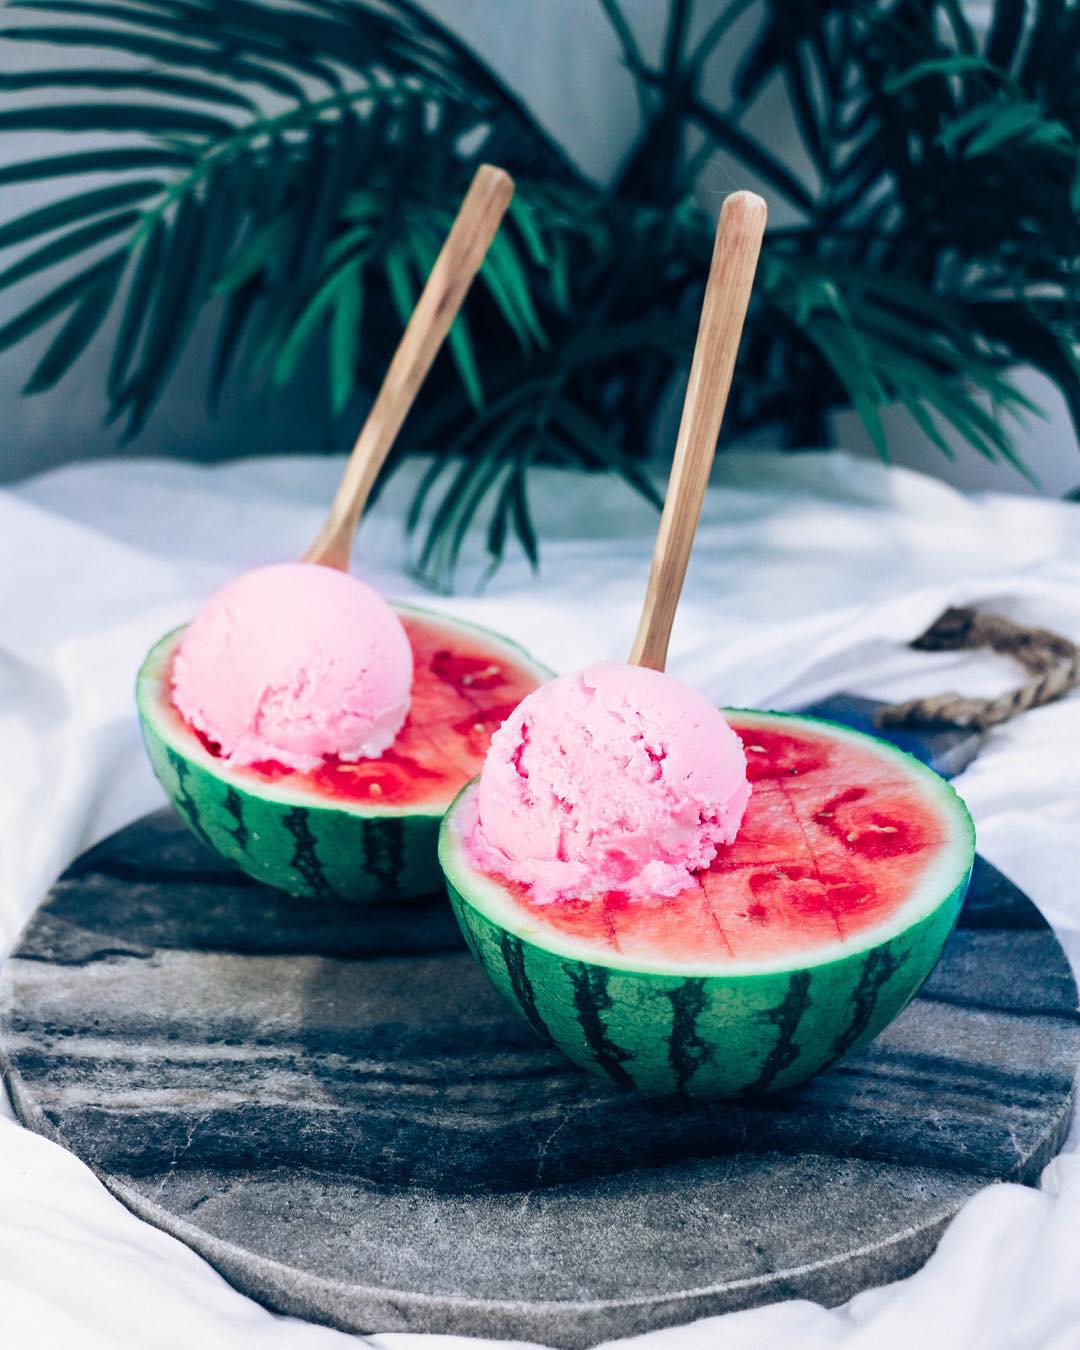 ROUND_II_of_this_addicting_WATERMELON_NICECREAM________-_a_combination_of_fro_nanas_and_chilled_watermelon_meat_this_time__A_much_more_simpler_combo_and_so_damn_delicious_____radplantlife_by_bysaber.jpg